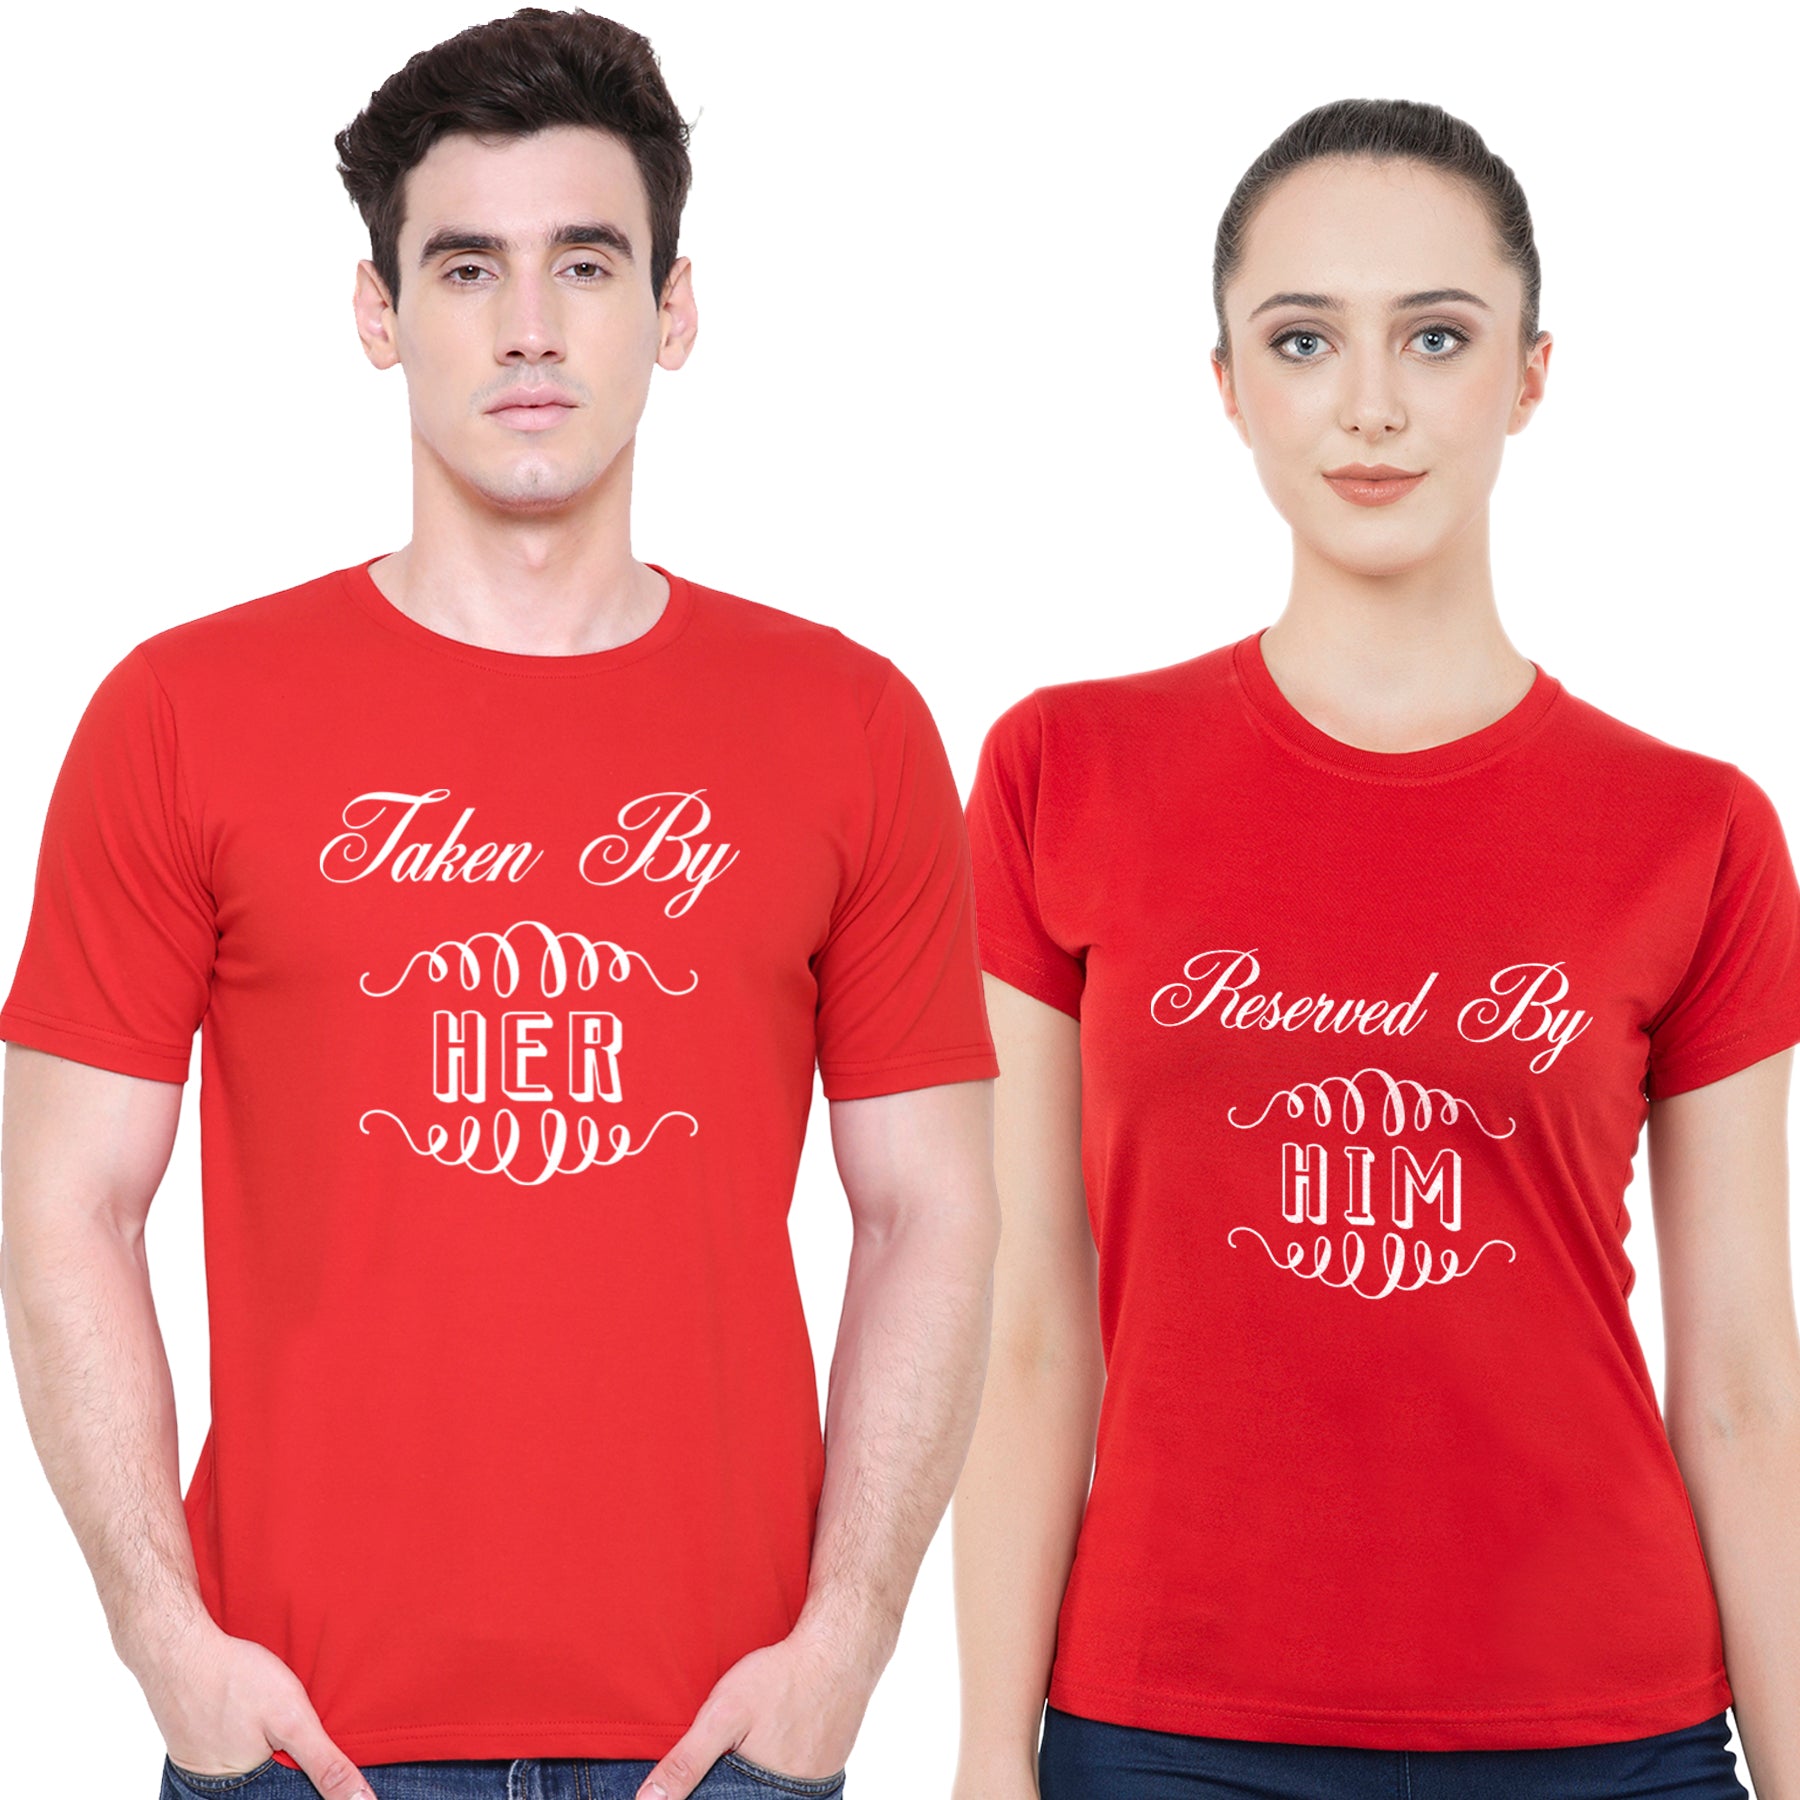 Taken by hermatching Couple T shirts- Red